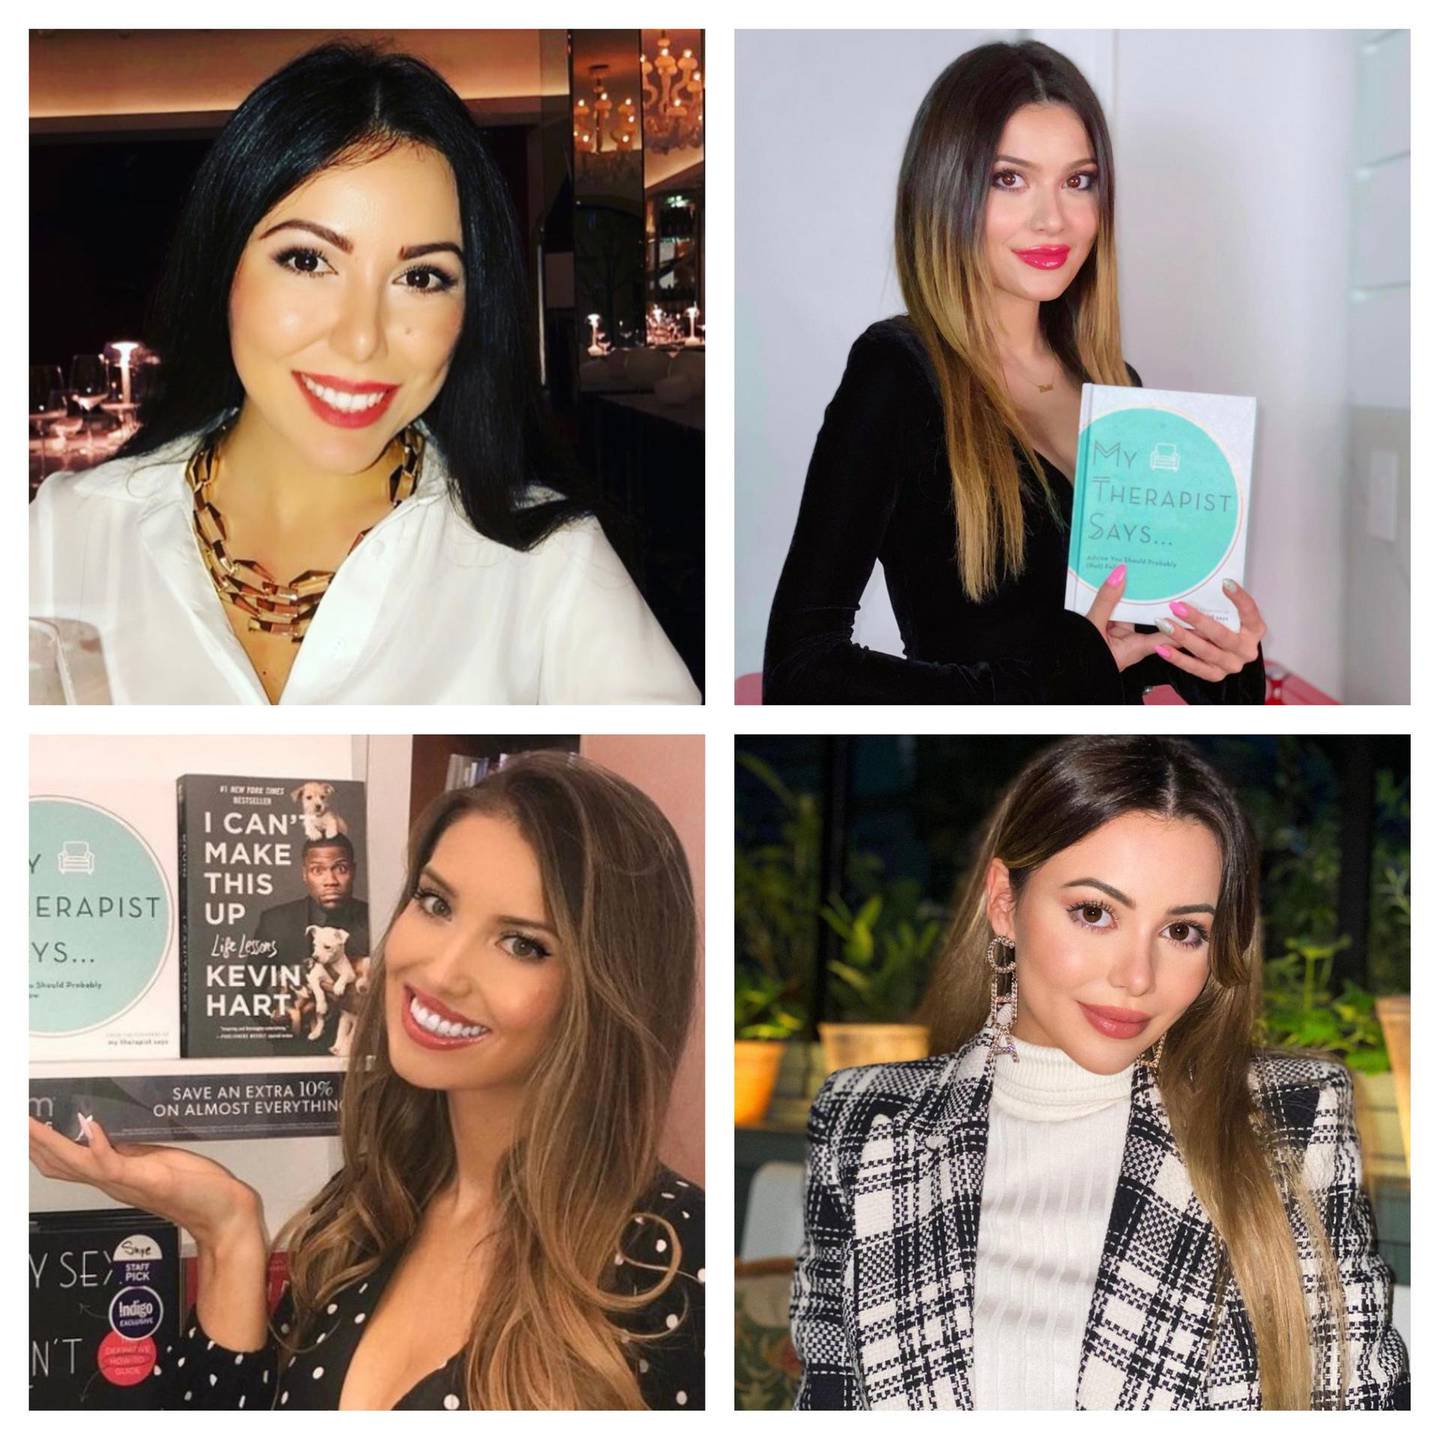 Clockwise from top left: Gina Tash, Lola Tash, Nora Tash and Nicole Argiris, the founders of, and content creators for, Instagram meme account @MyTherapistSays, which has more than 6.1 million followers. Courtesy @MyTherapistSays